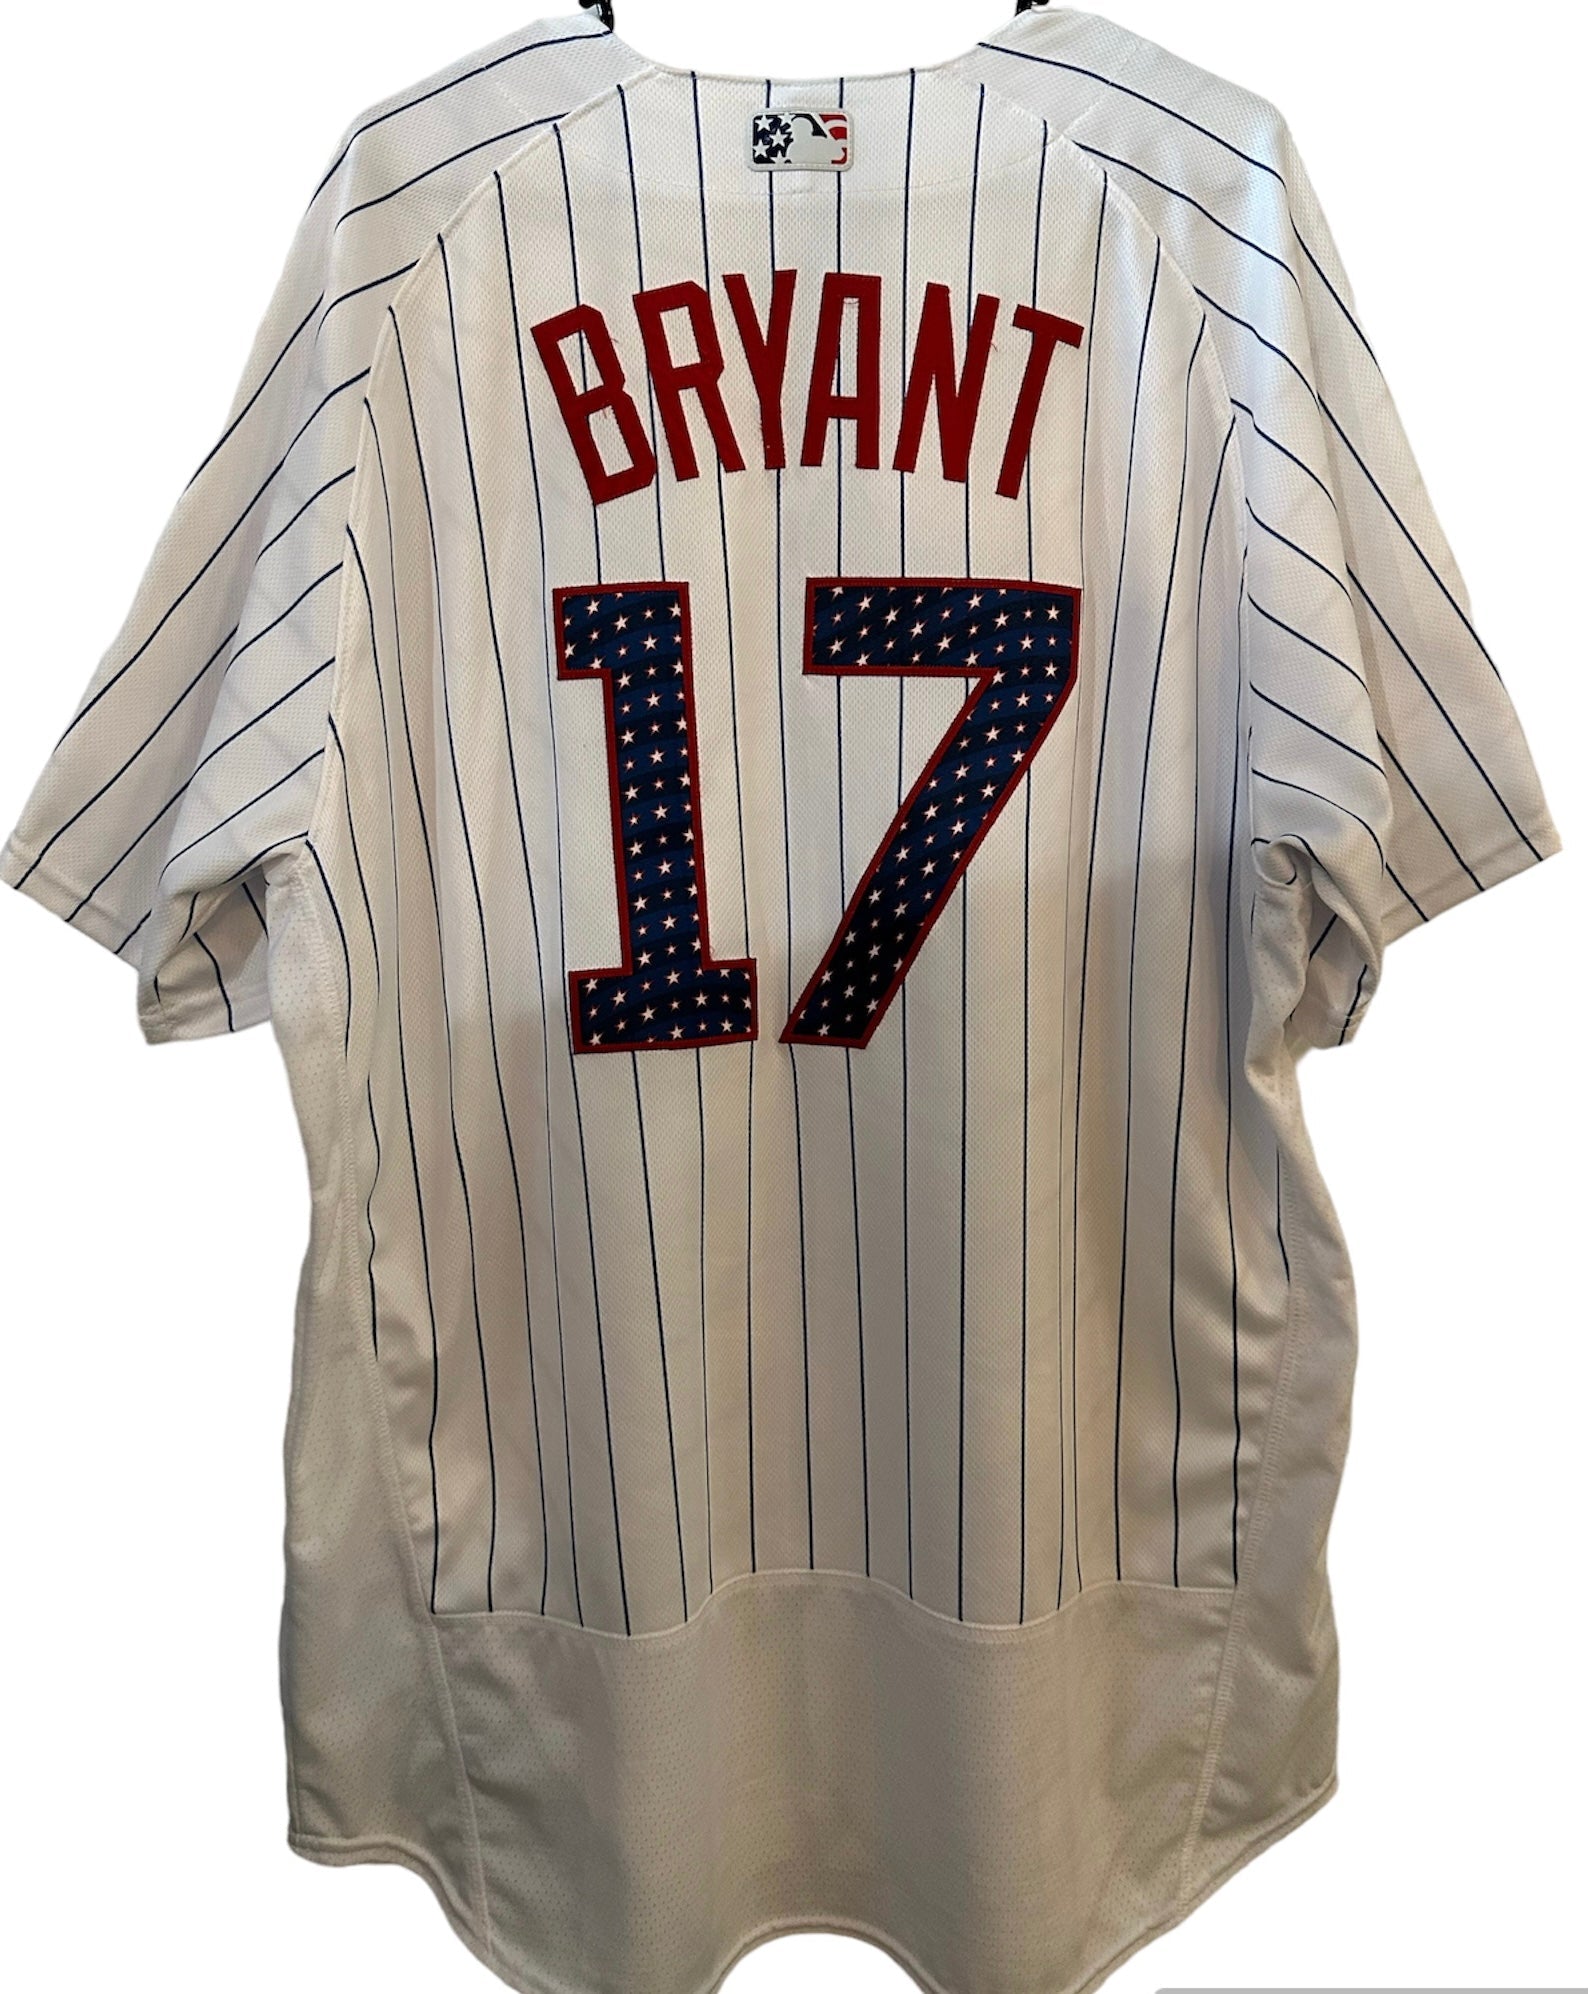 Kris Bryant Chicago Cubs Autographed White Replica Jersey